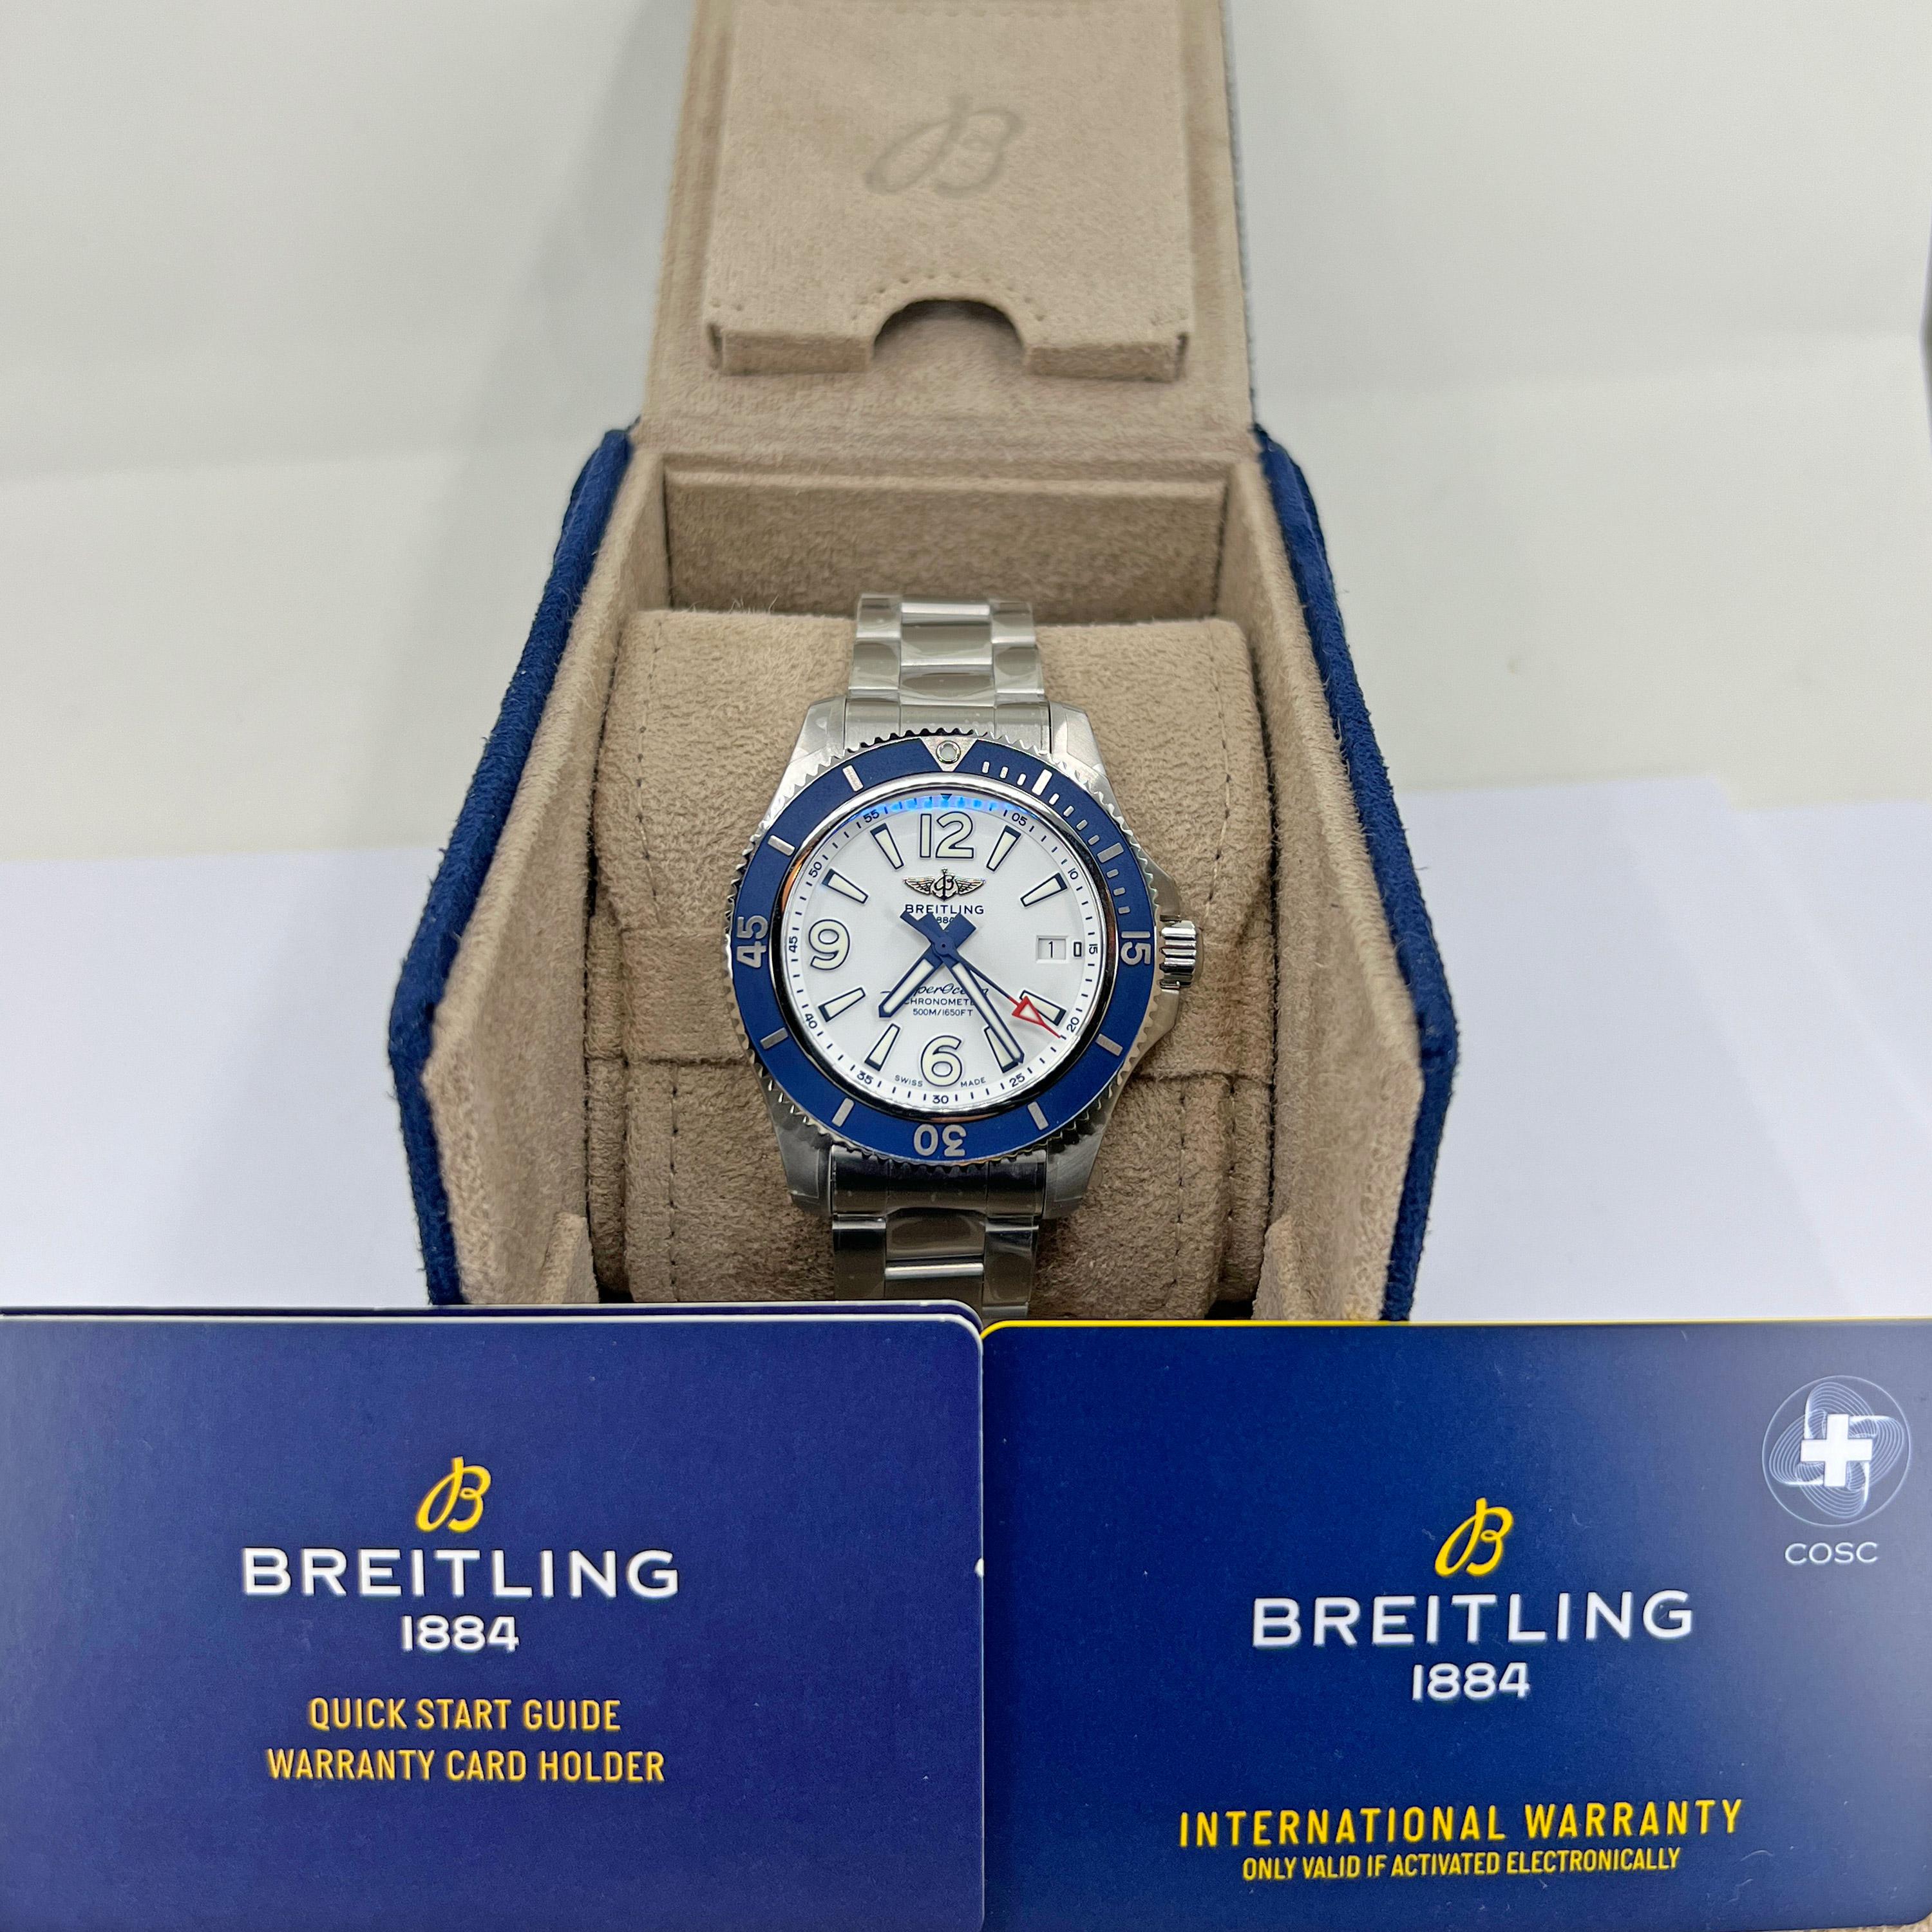 Breitling SUPEROCEAN AUTOMATIC 42 Stainless Steel - White Dial
42 mm Stainless Steel case. Unidirectional, ratcheted bezel. Cambered sapphire, glareproofed both sides crystal. Breitling 17 calibre, self-winding mechanical movement, 38 hours power